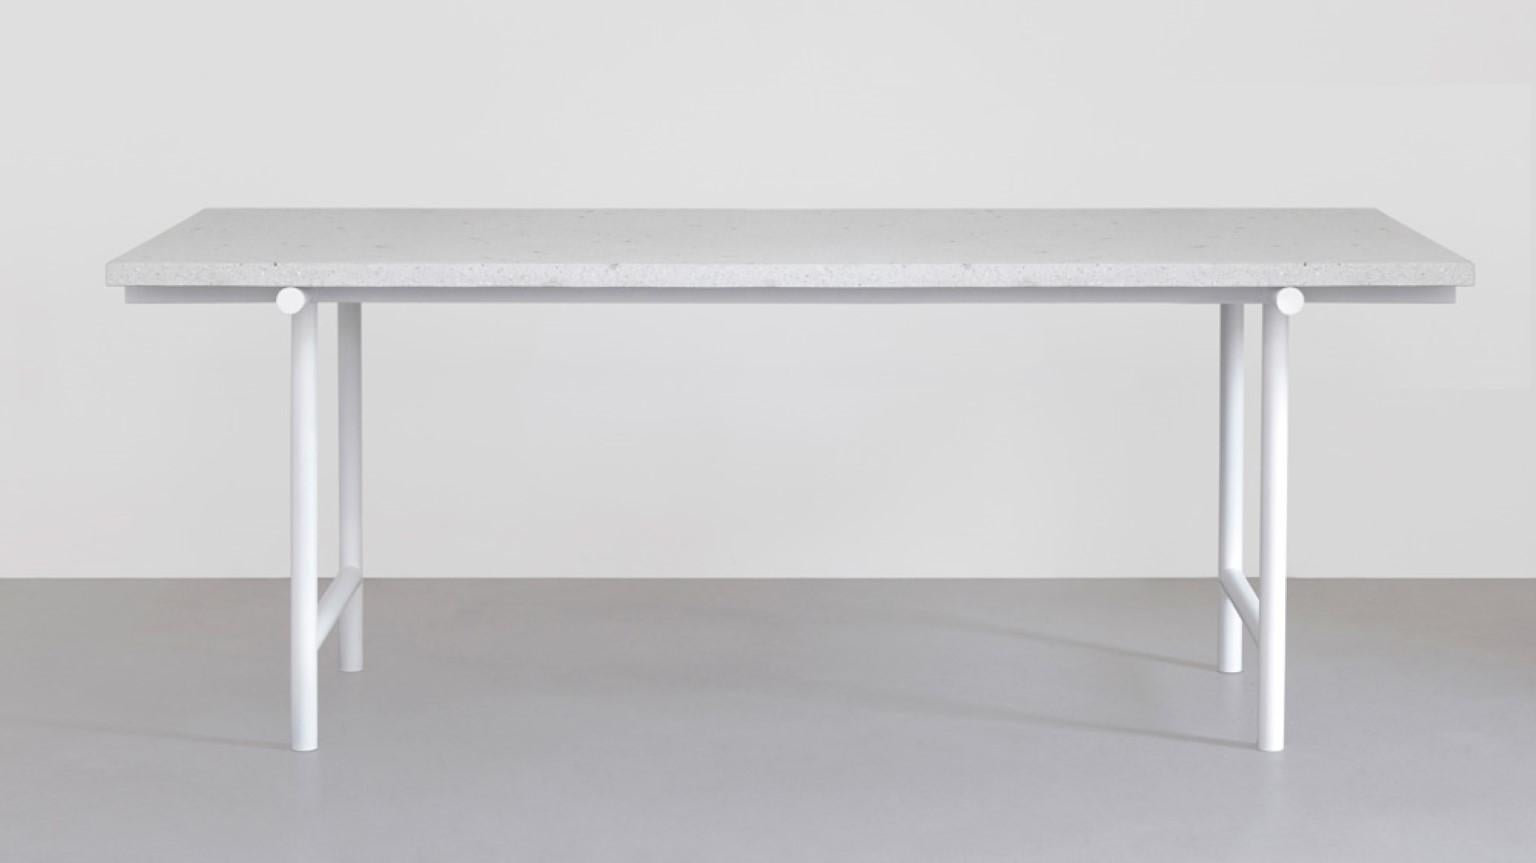 Terrazo Bob table by Llot Llov
Dimensions: W 90 x D 200 x H 76 cm
Materials: Nail polish Terrazzo


The dining table BOB’s table top is made of GLACIER nail-polish terrazzo, the table base structure consists of a powder-coated steel